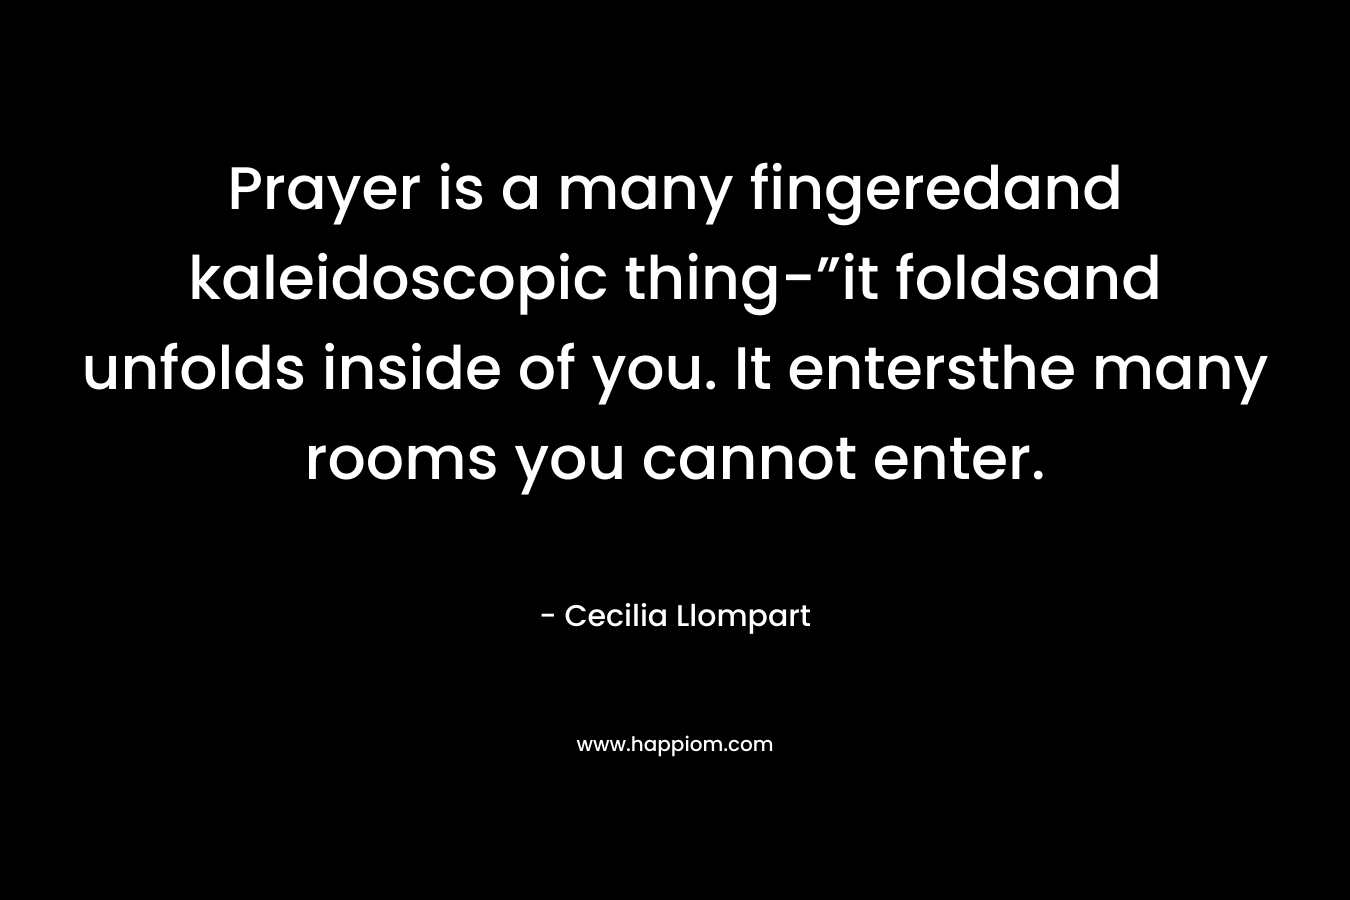 Prayer is a many fingeredand kaleidoscopic thing-”it foldsand unfolds inside of you. It entersthe many rooms you cannot enter.